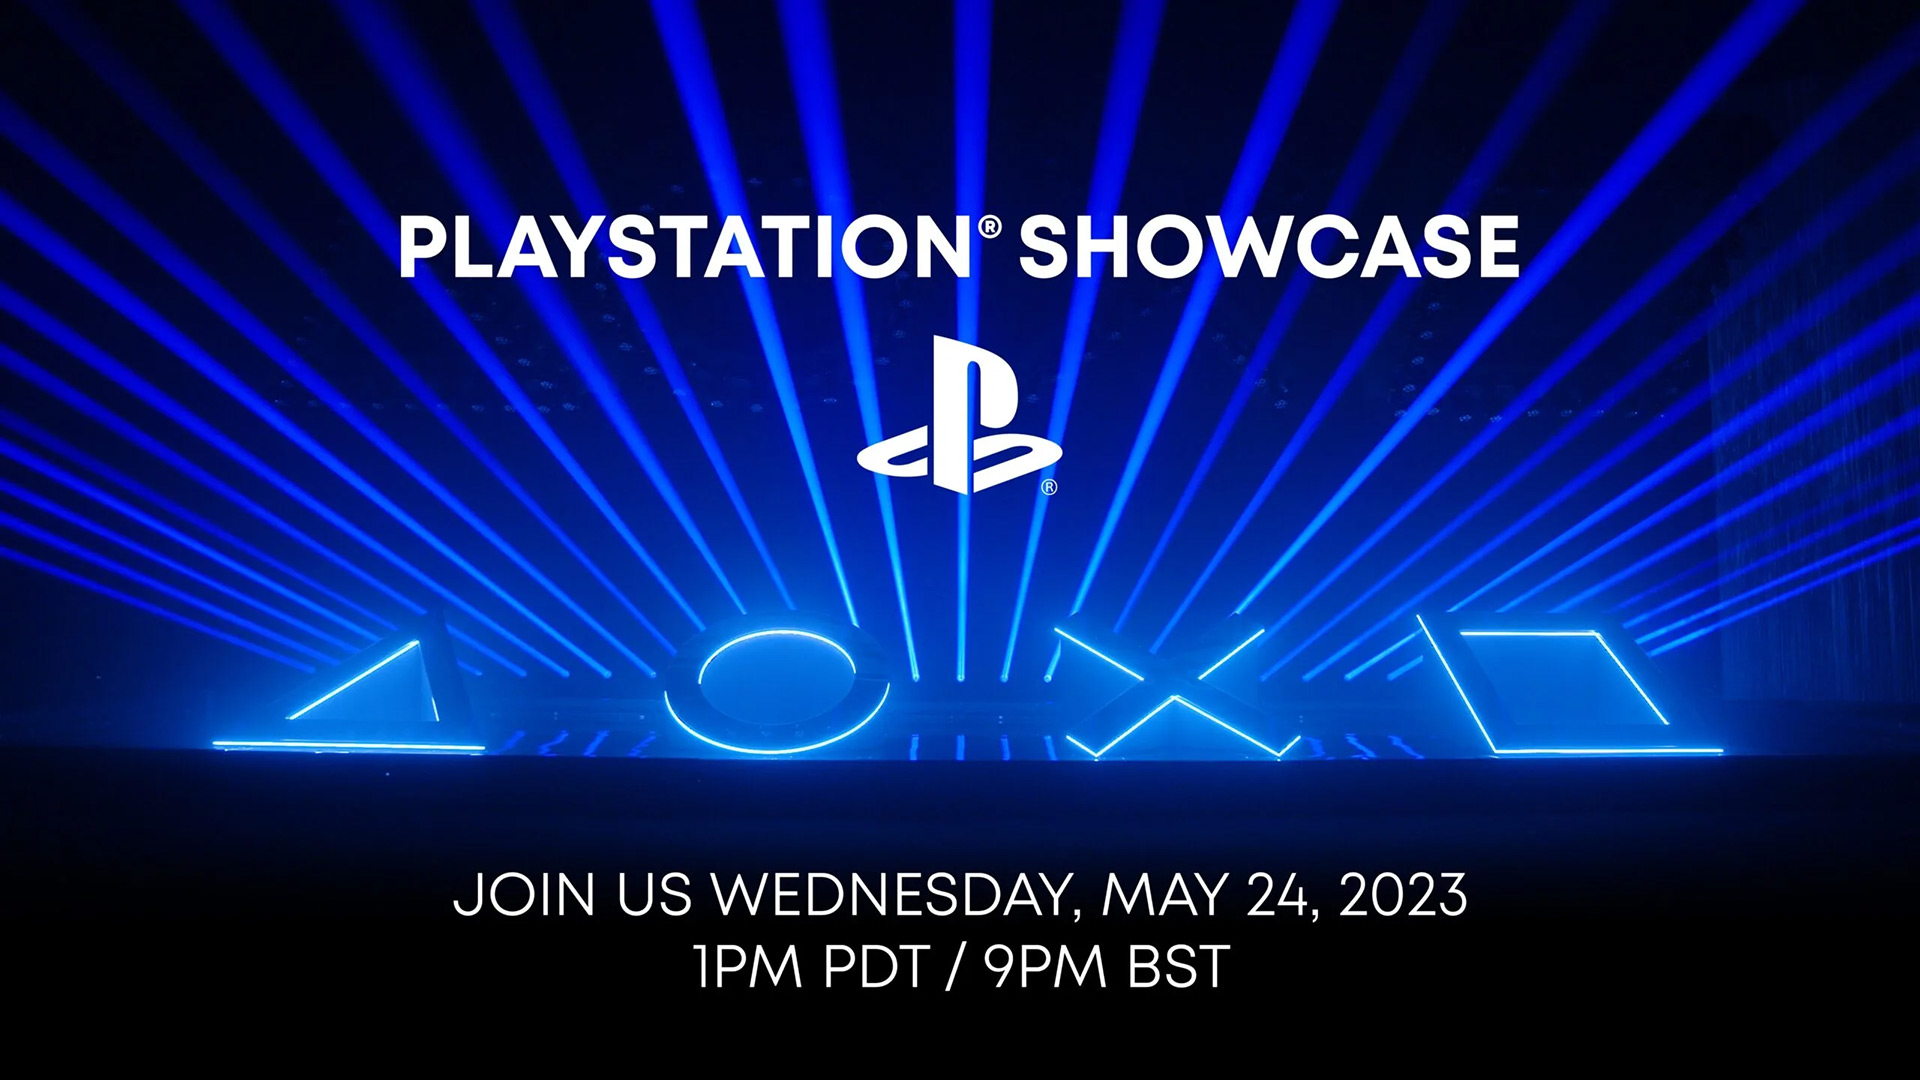 The next PlayStation Showcase broadcasts live on May 24